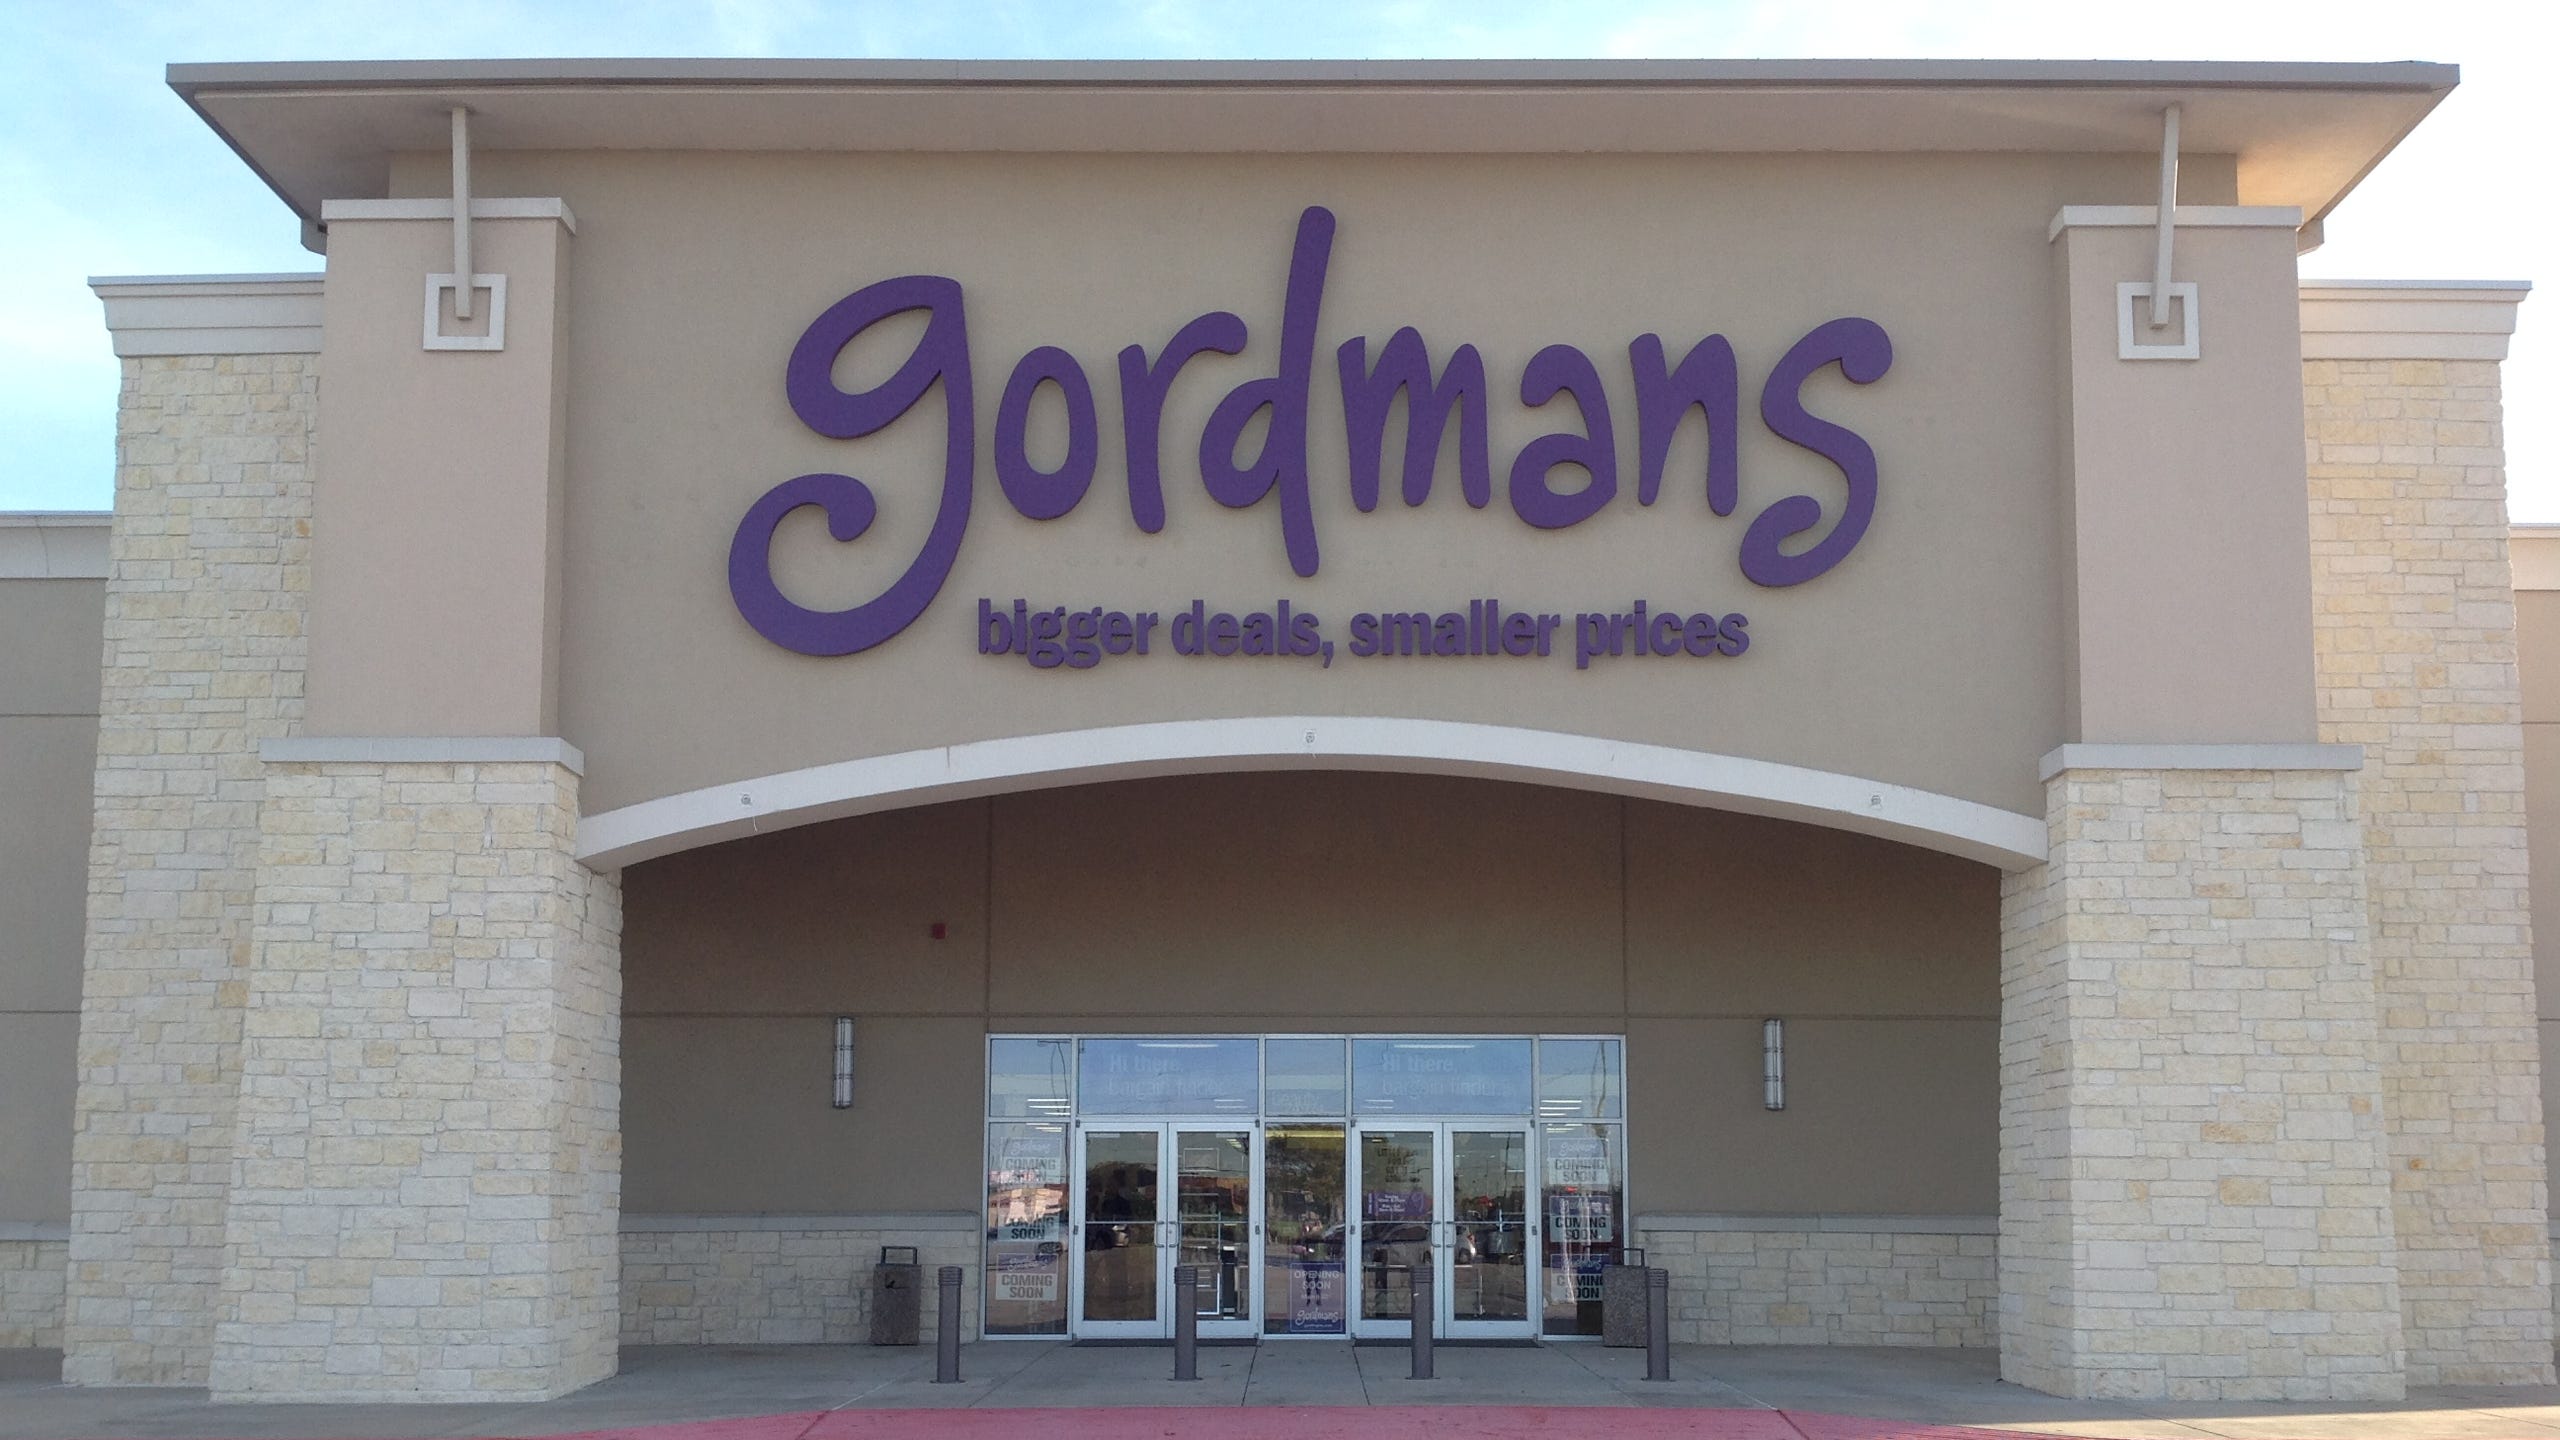 Gordmans Brings A Different Brand Of Retail Store To Mukwonago